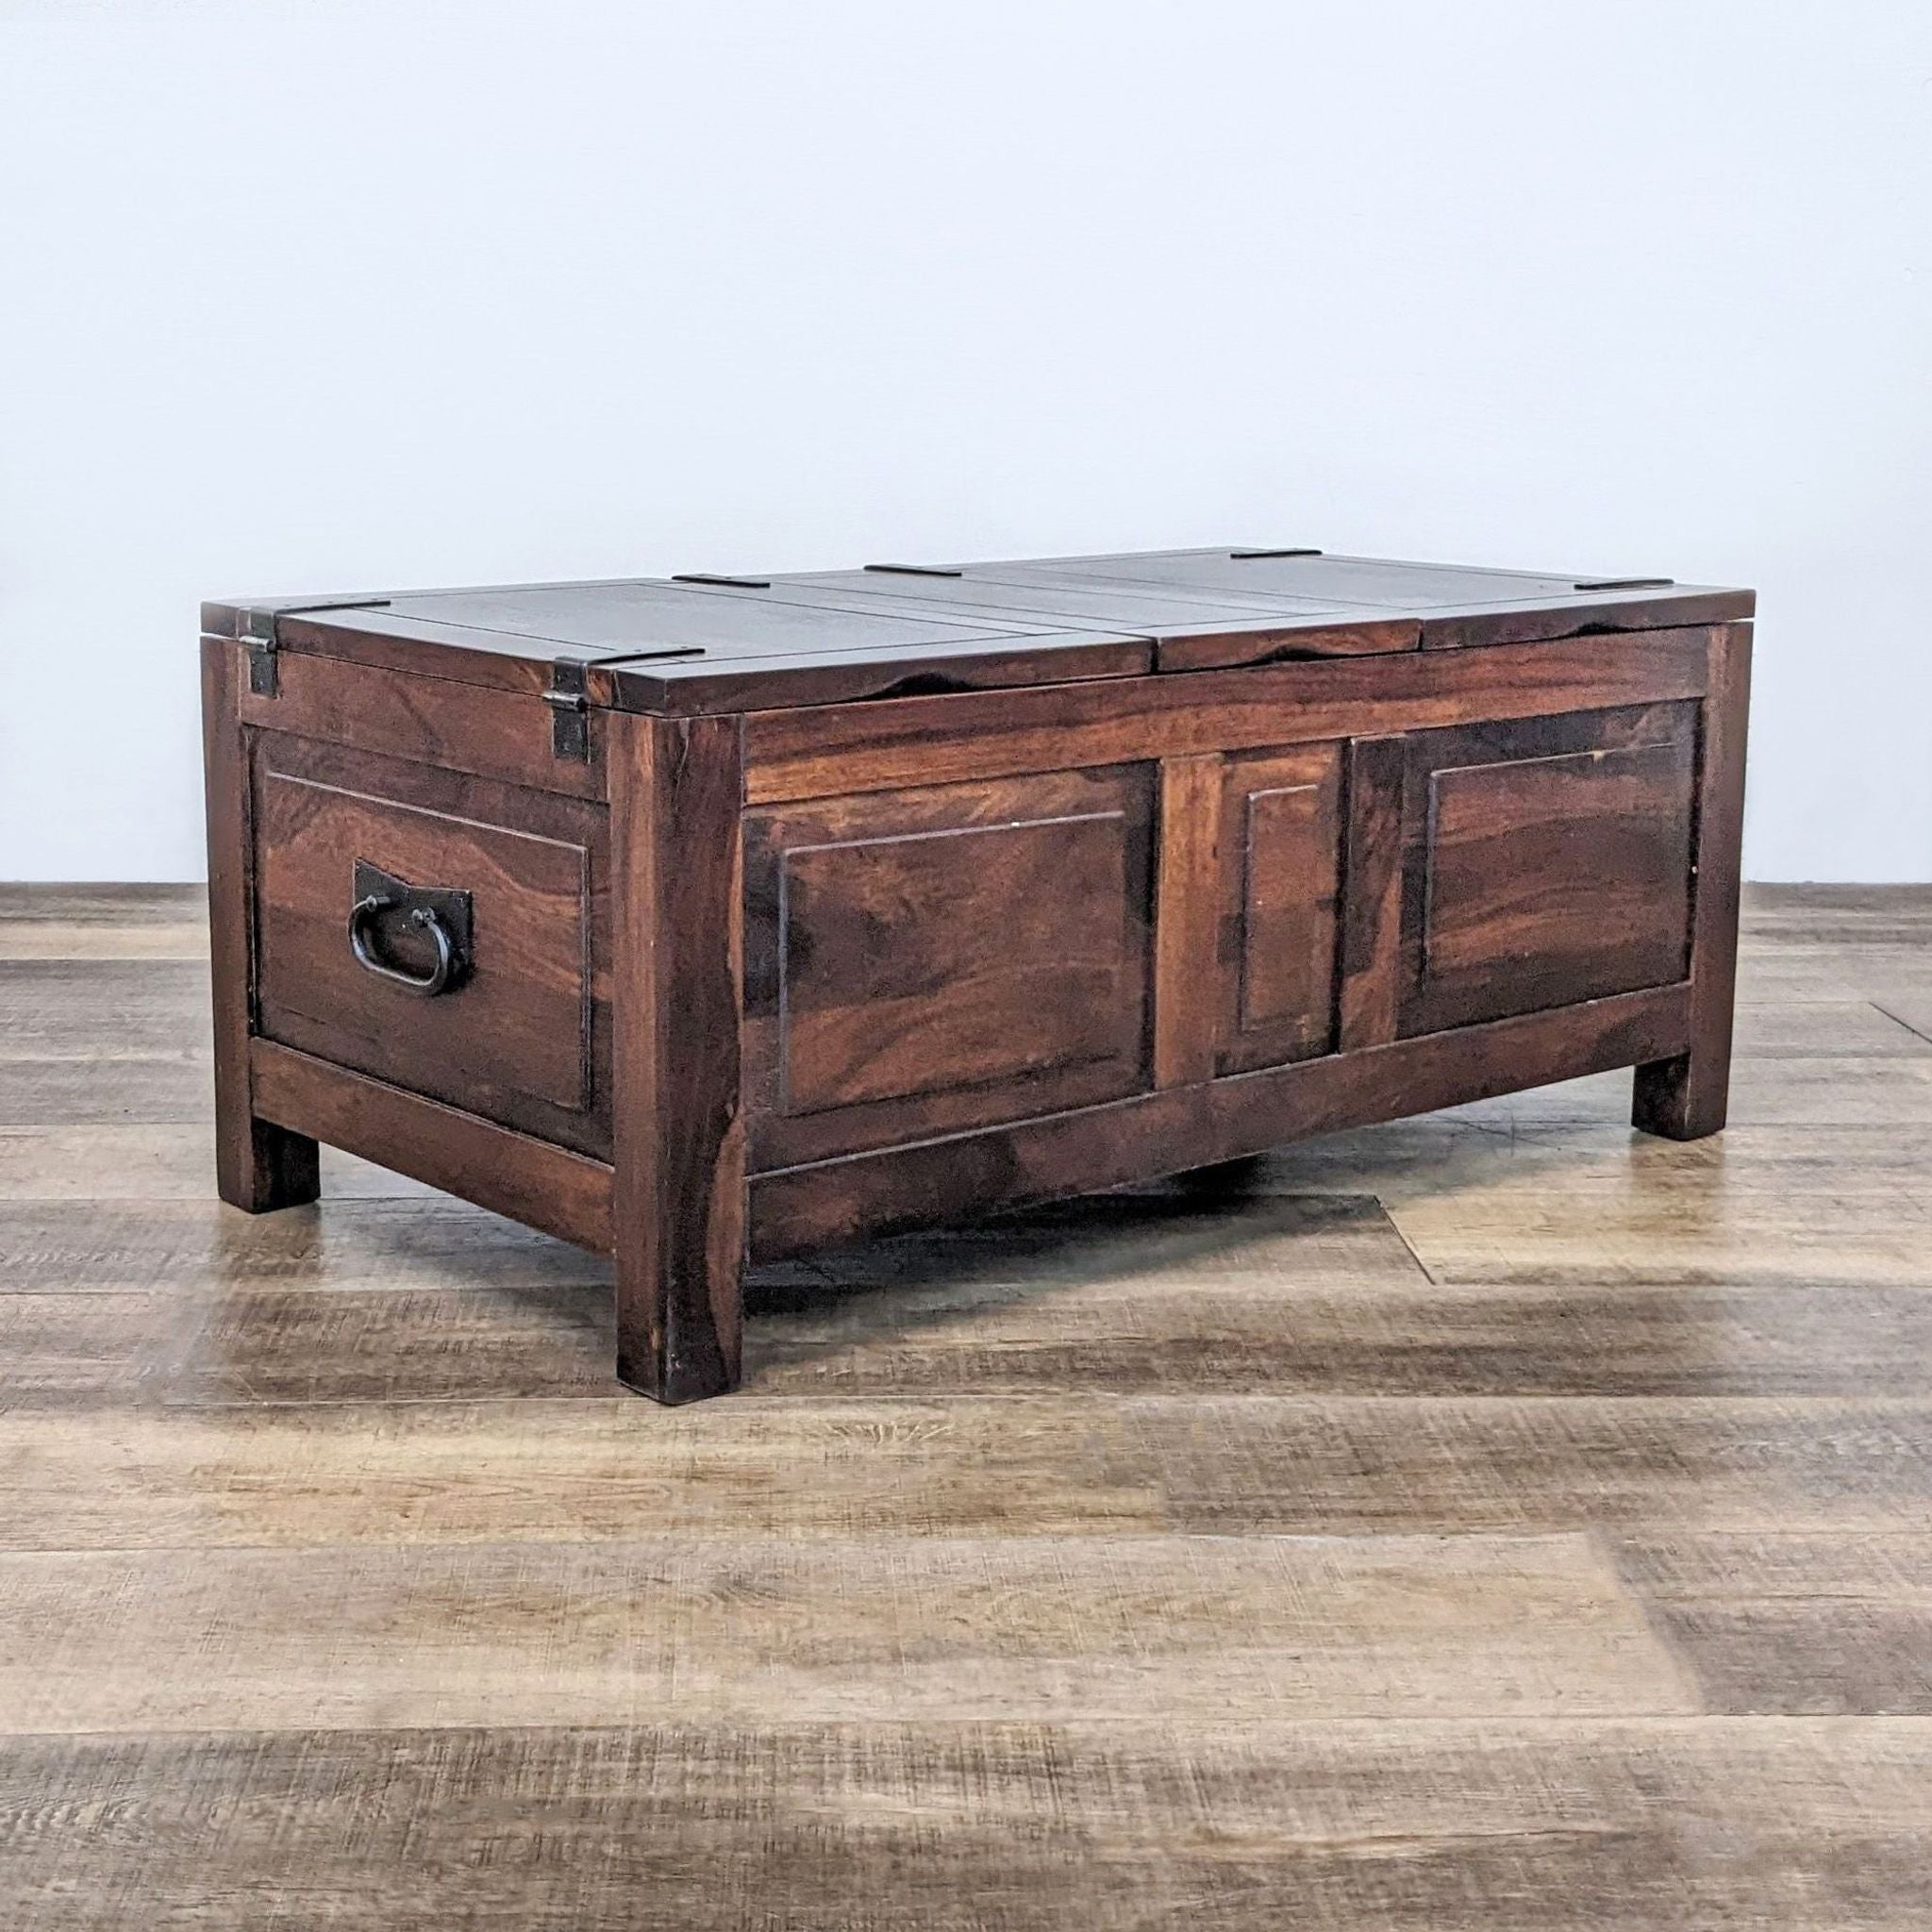 Reperch brand wooden coffee table with closed lift-top storage and black metal hardware on wooden floor.